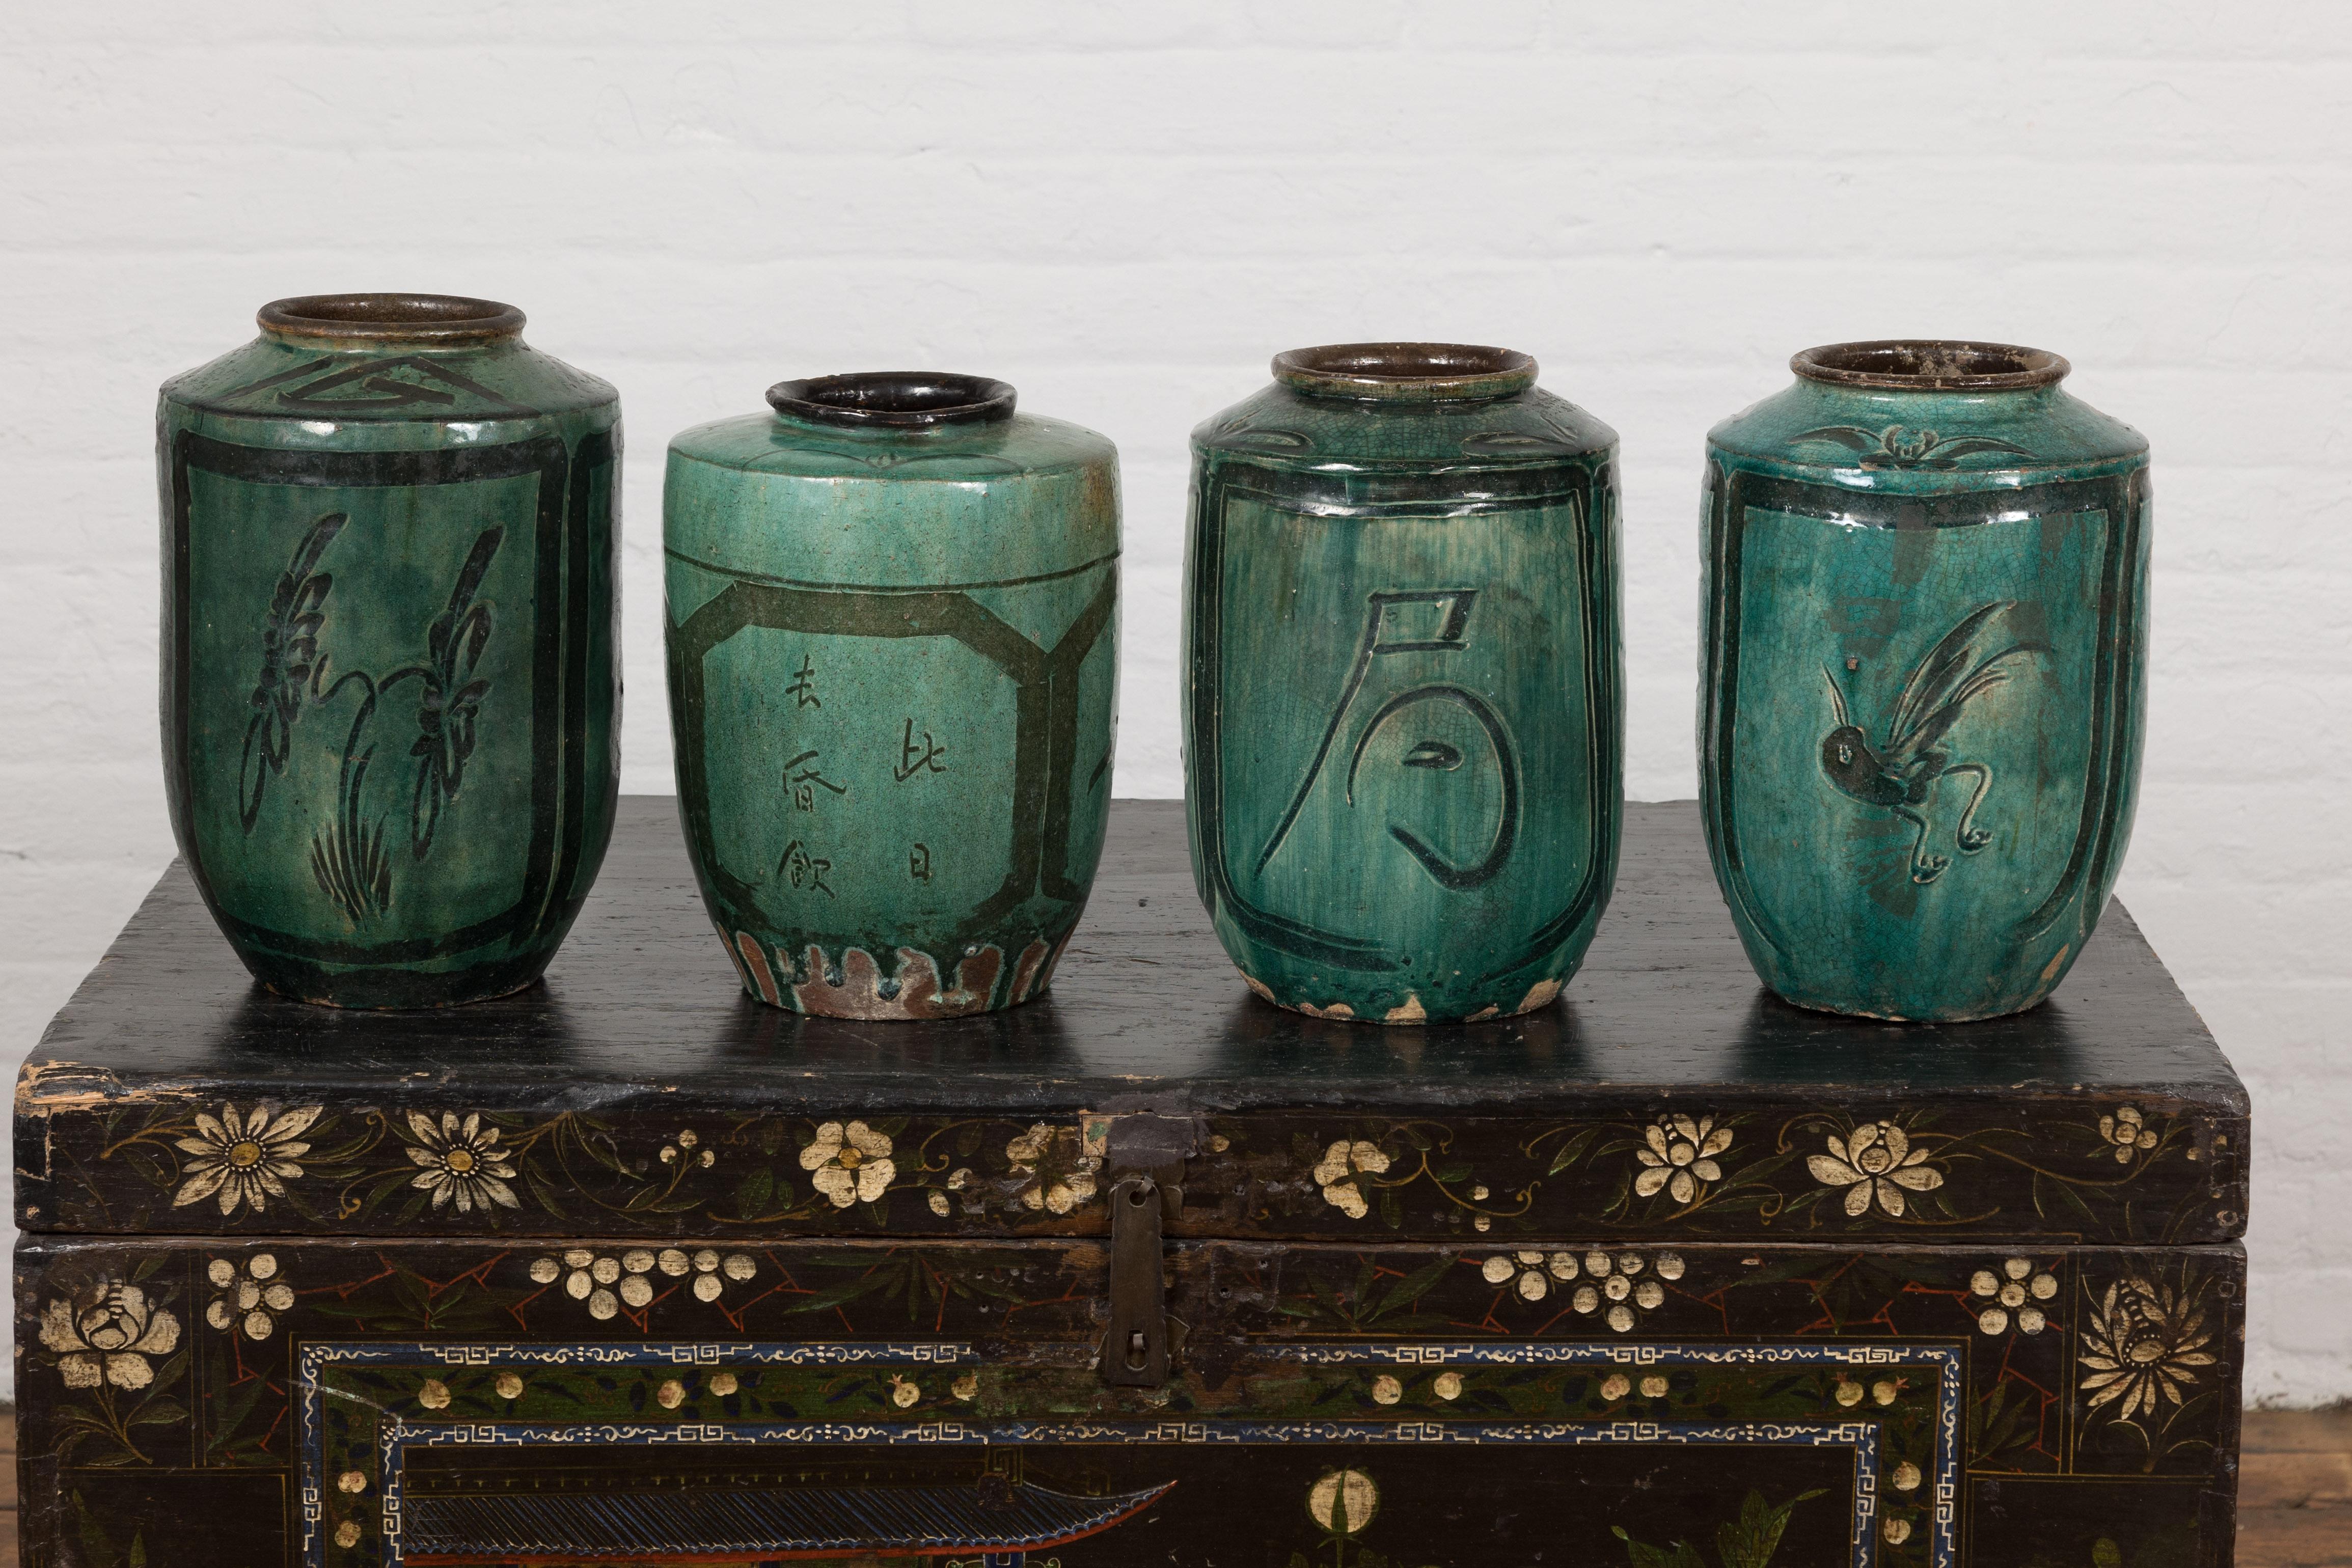 Four small Chinese Qing Dynasty period green glazed ceramic rice wine jug vessels from the Hunan Province, priced and sold individually. Beckoning from the depths of Chinese history, this quartet of Qing Dynasty rice wine jug vessels from the Hunan